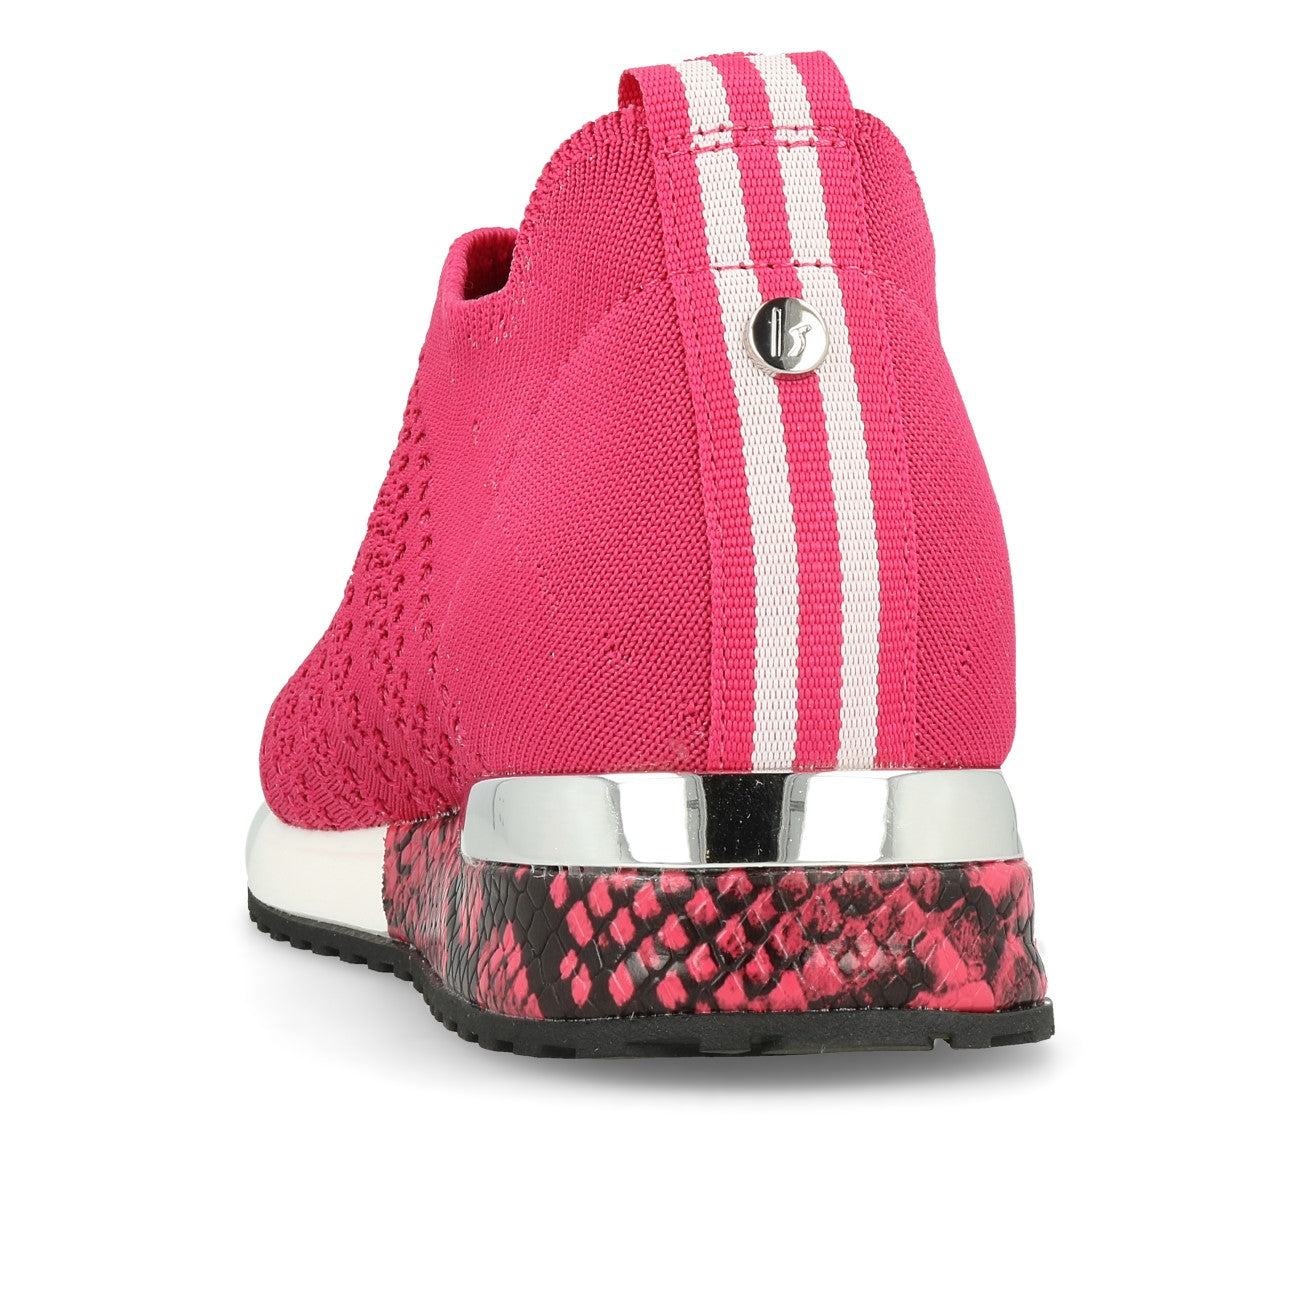 La Strada 1802649 Laced Up Knitted Sneaker Damen Fuchsia Knitted